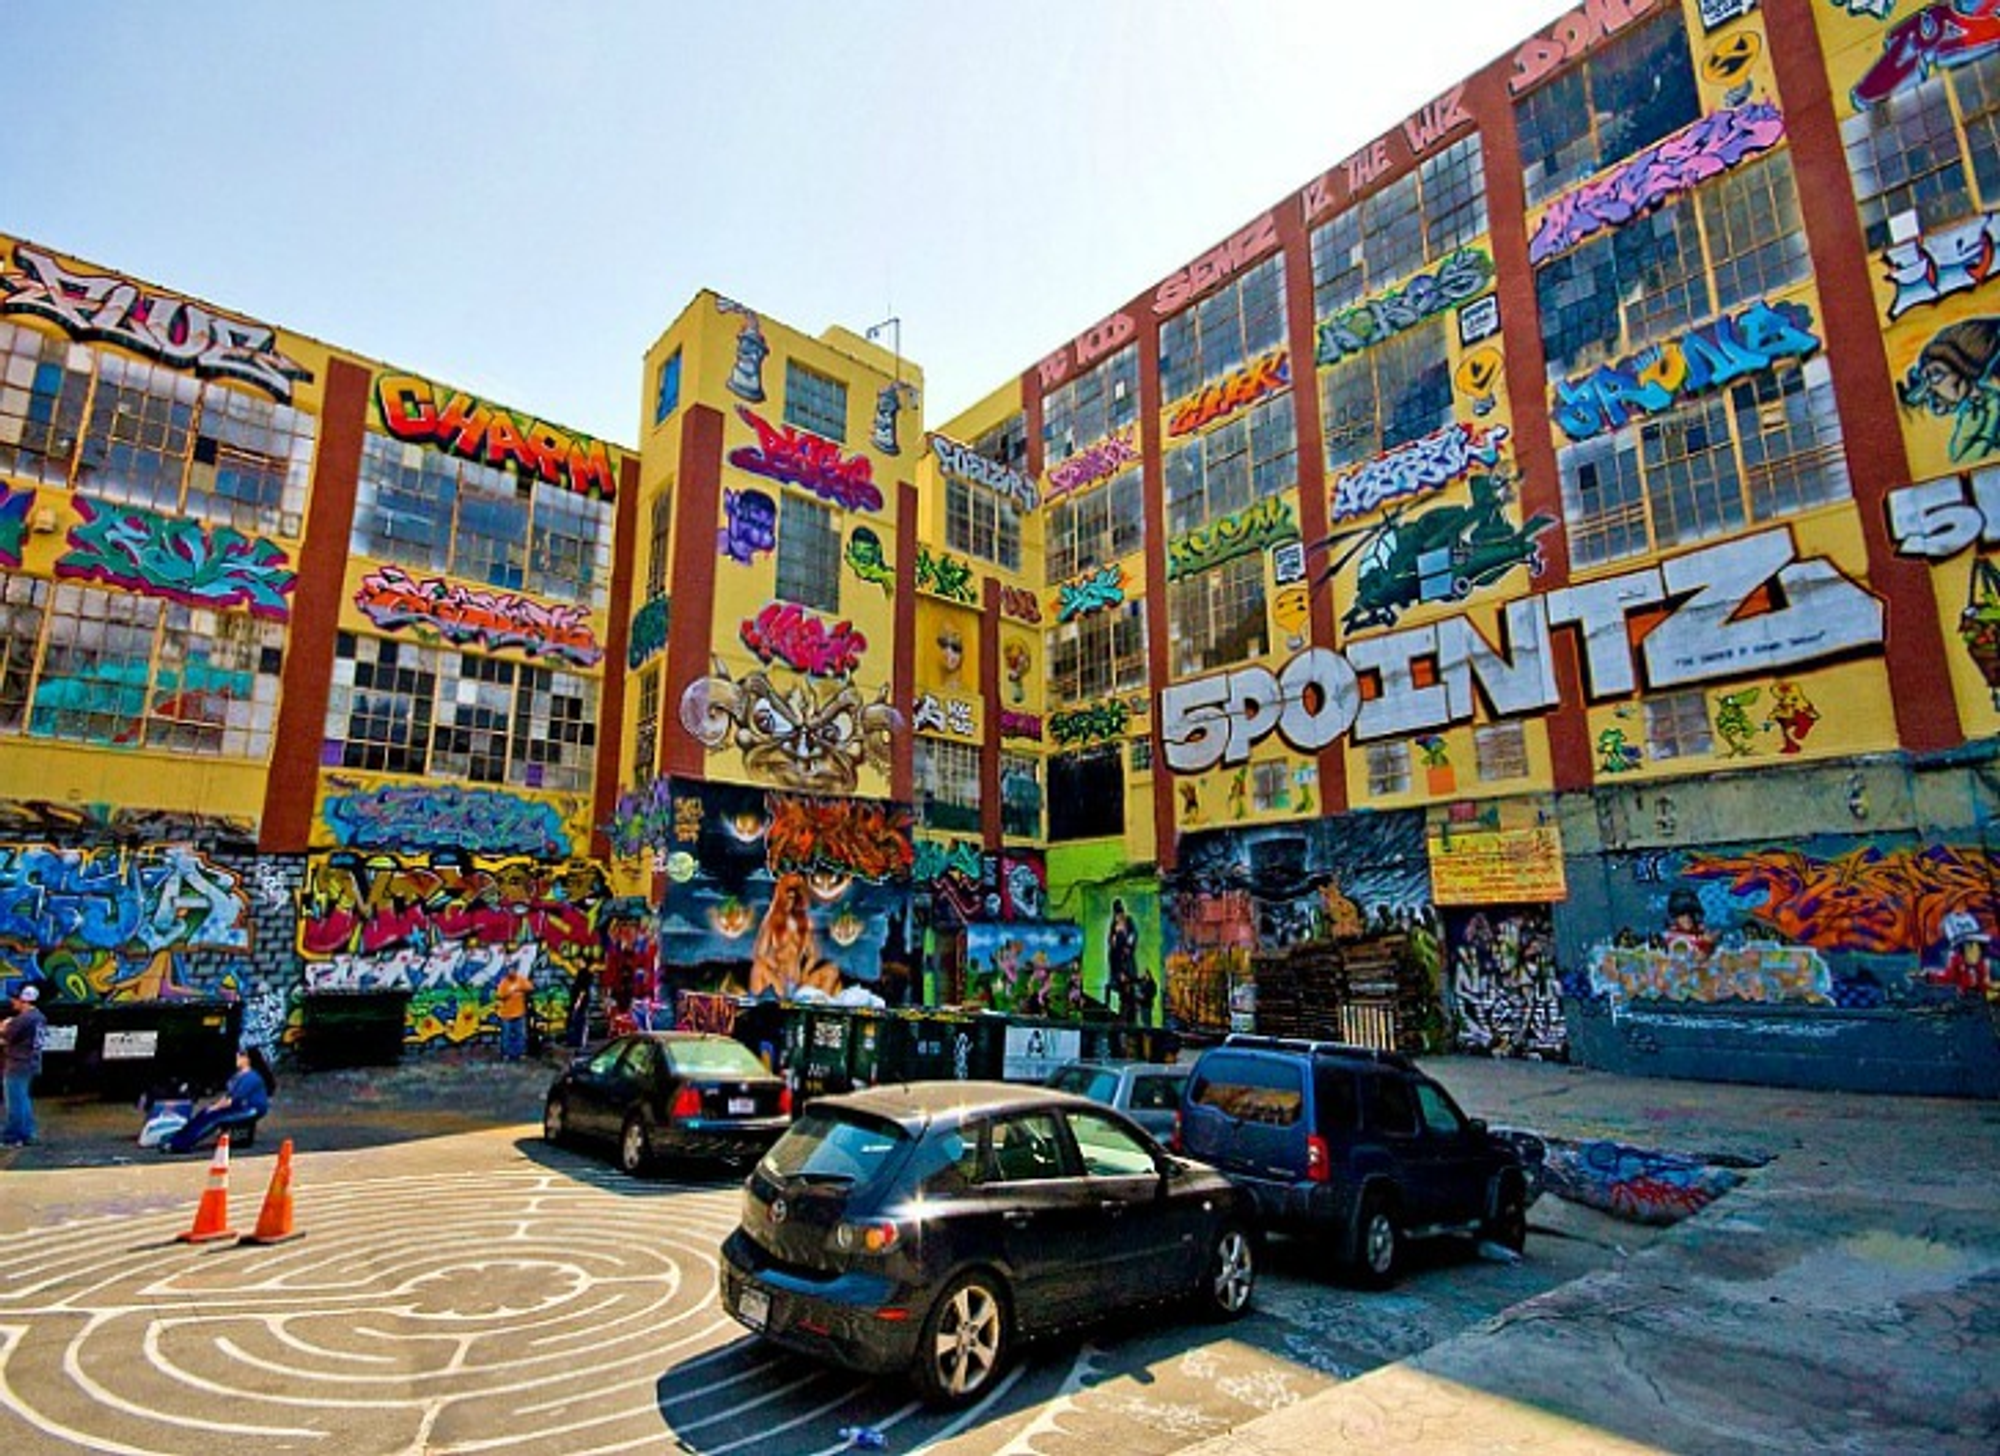 5Pointz just before the demolition in 2013.